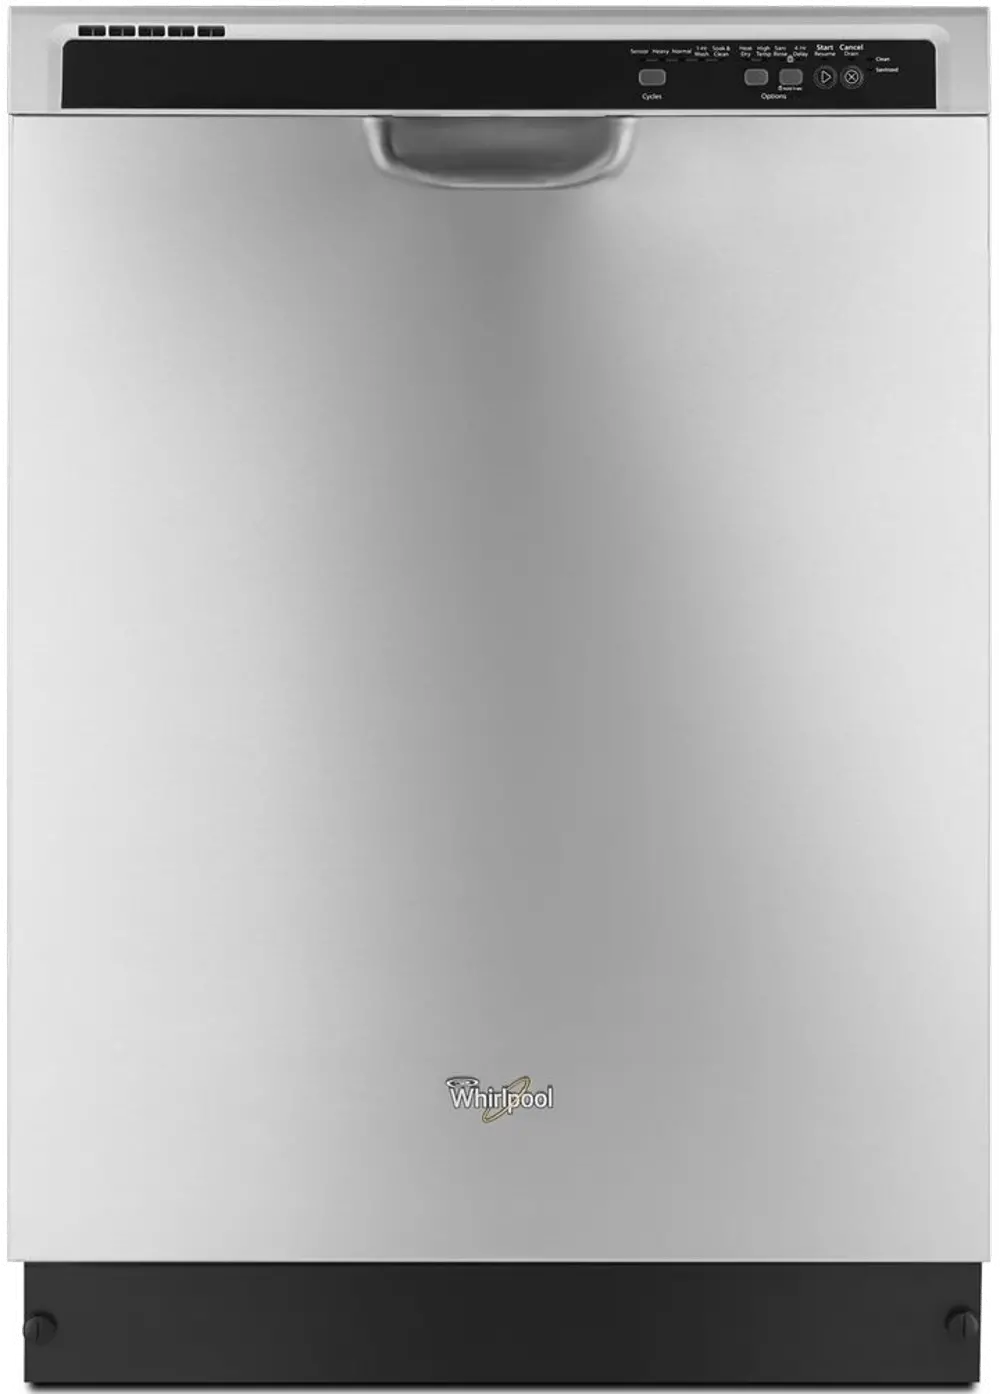 WDF540PADM Whirlpool Front Control Dishwasher - Stainless Steel-1